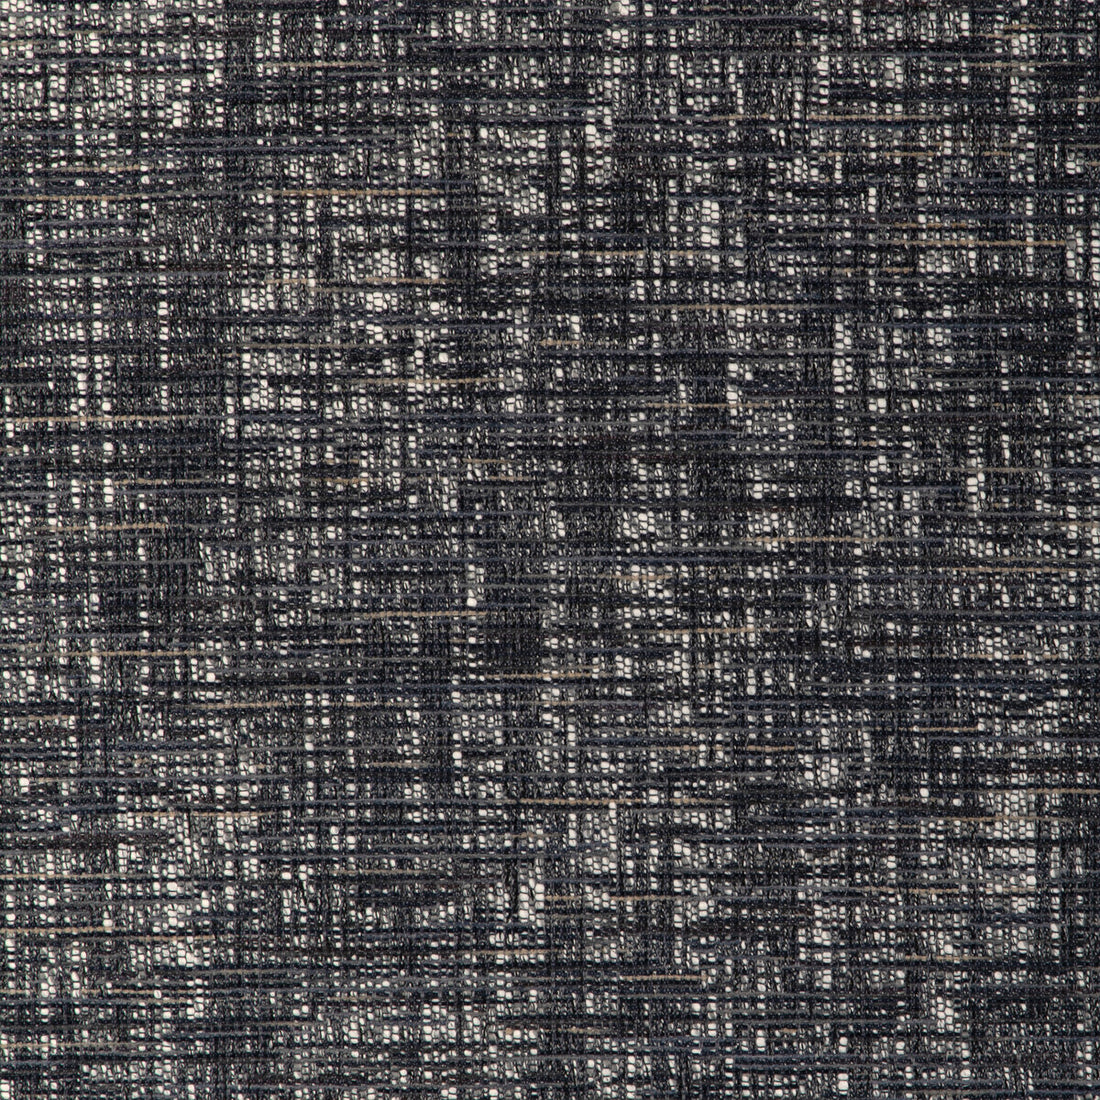 Kravet Design fabric in 37116-50 color - pattern 37116.50.0 - by Kravet Design in the Woven Colors collection